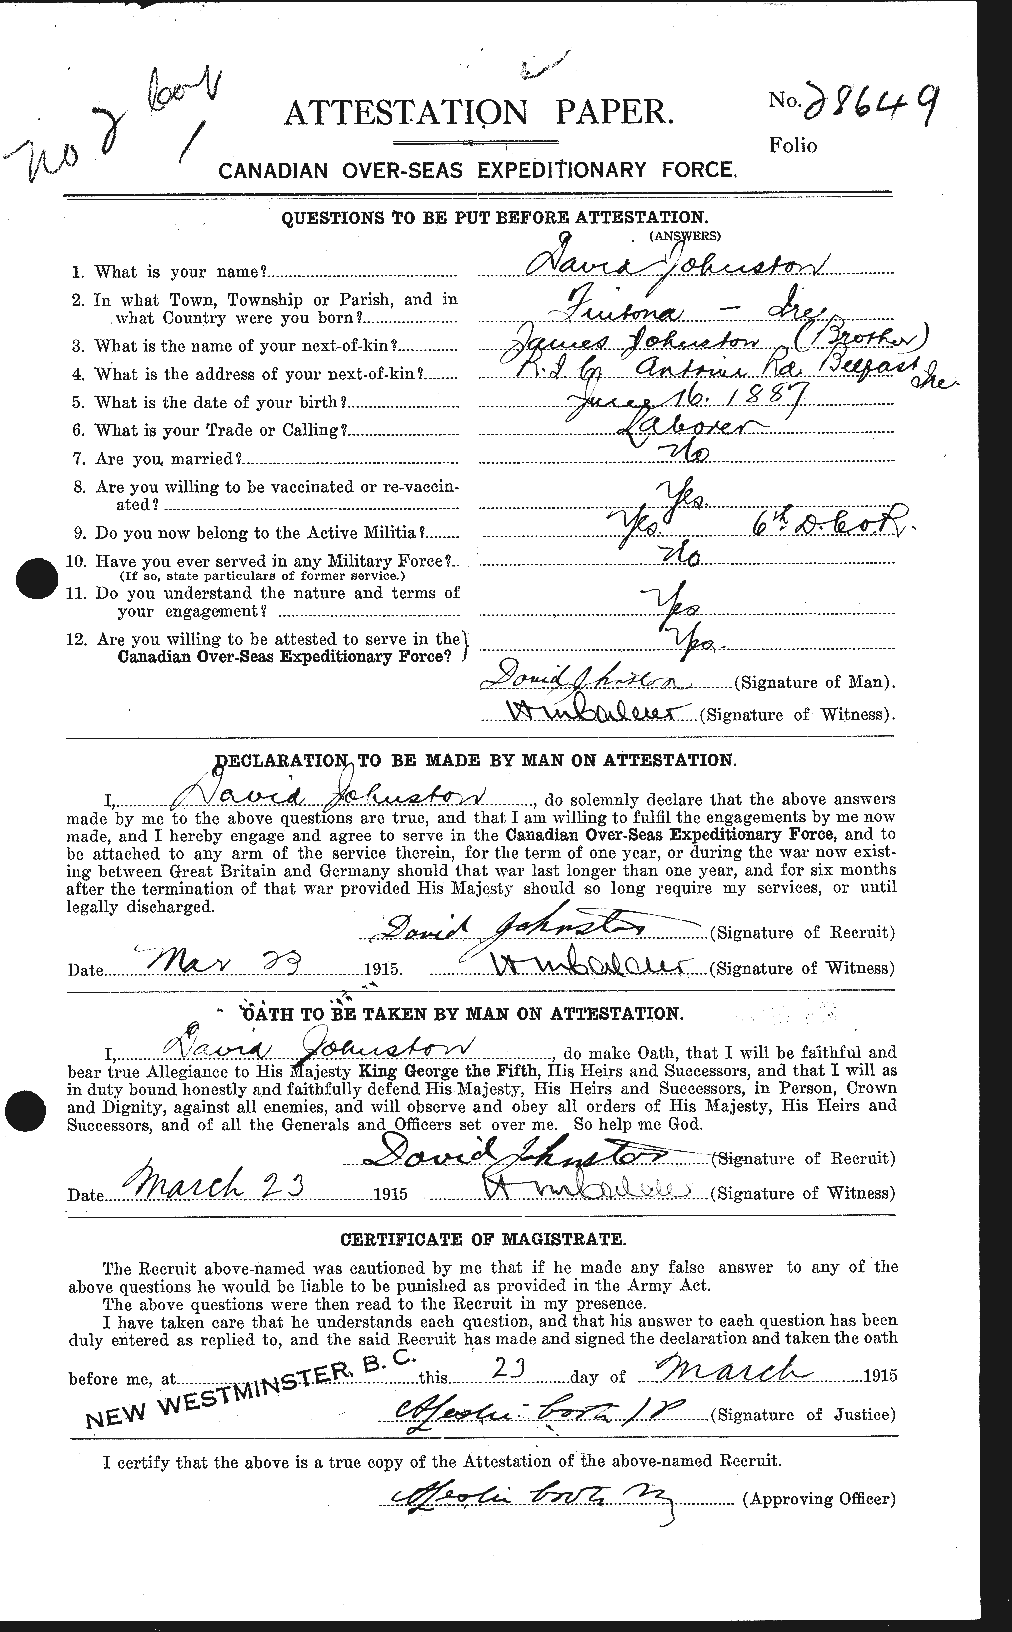 Personnel Records of the First World War - CEF 423156a